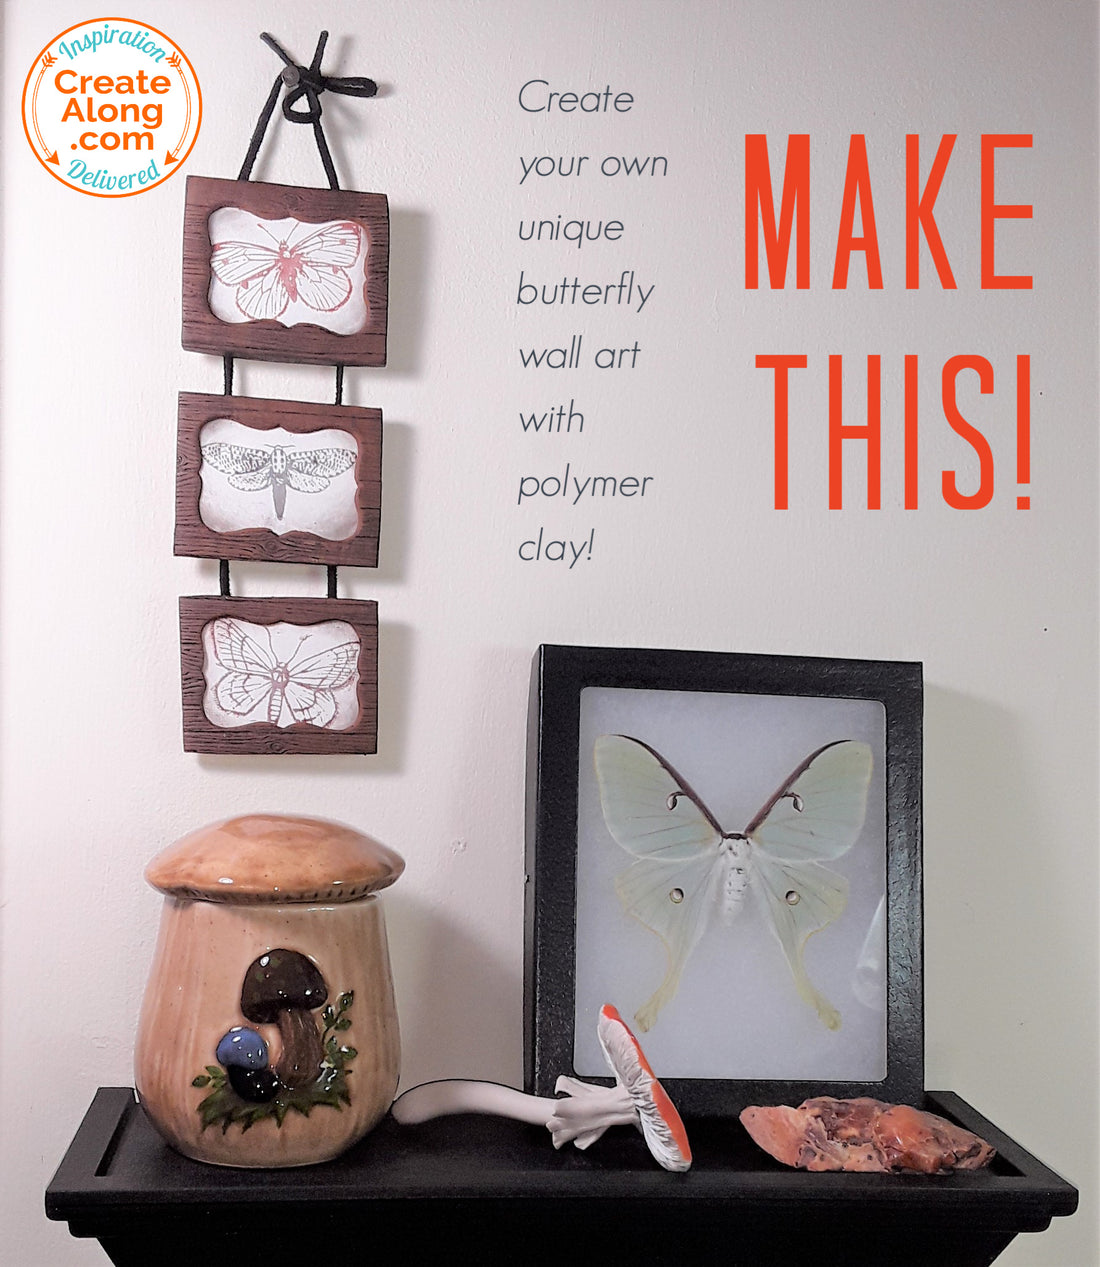 Butterflies! It's Easy to Make this Awesome Polymer Clay Wall Hanging